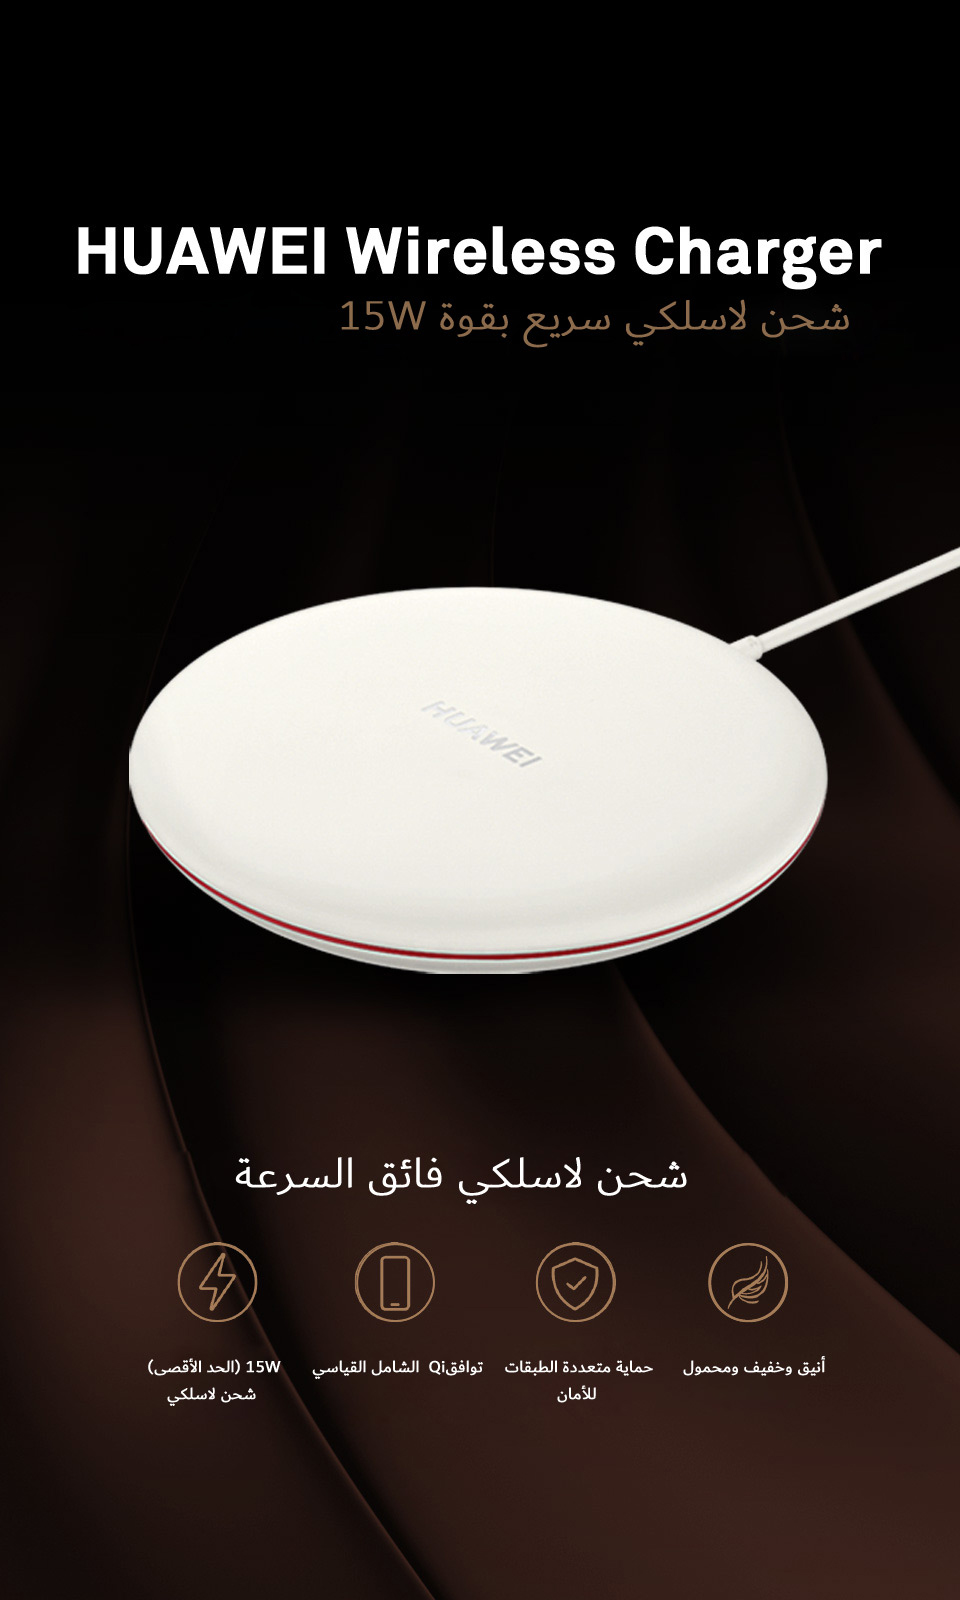 HUAWEI Wireless Charger